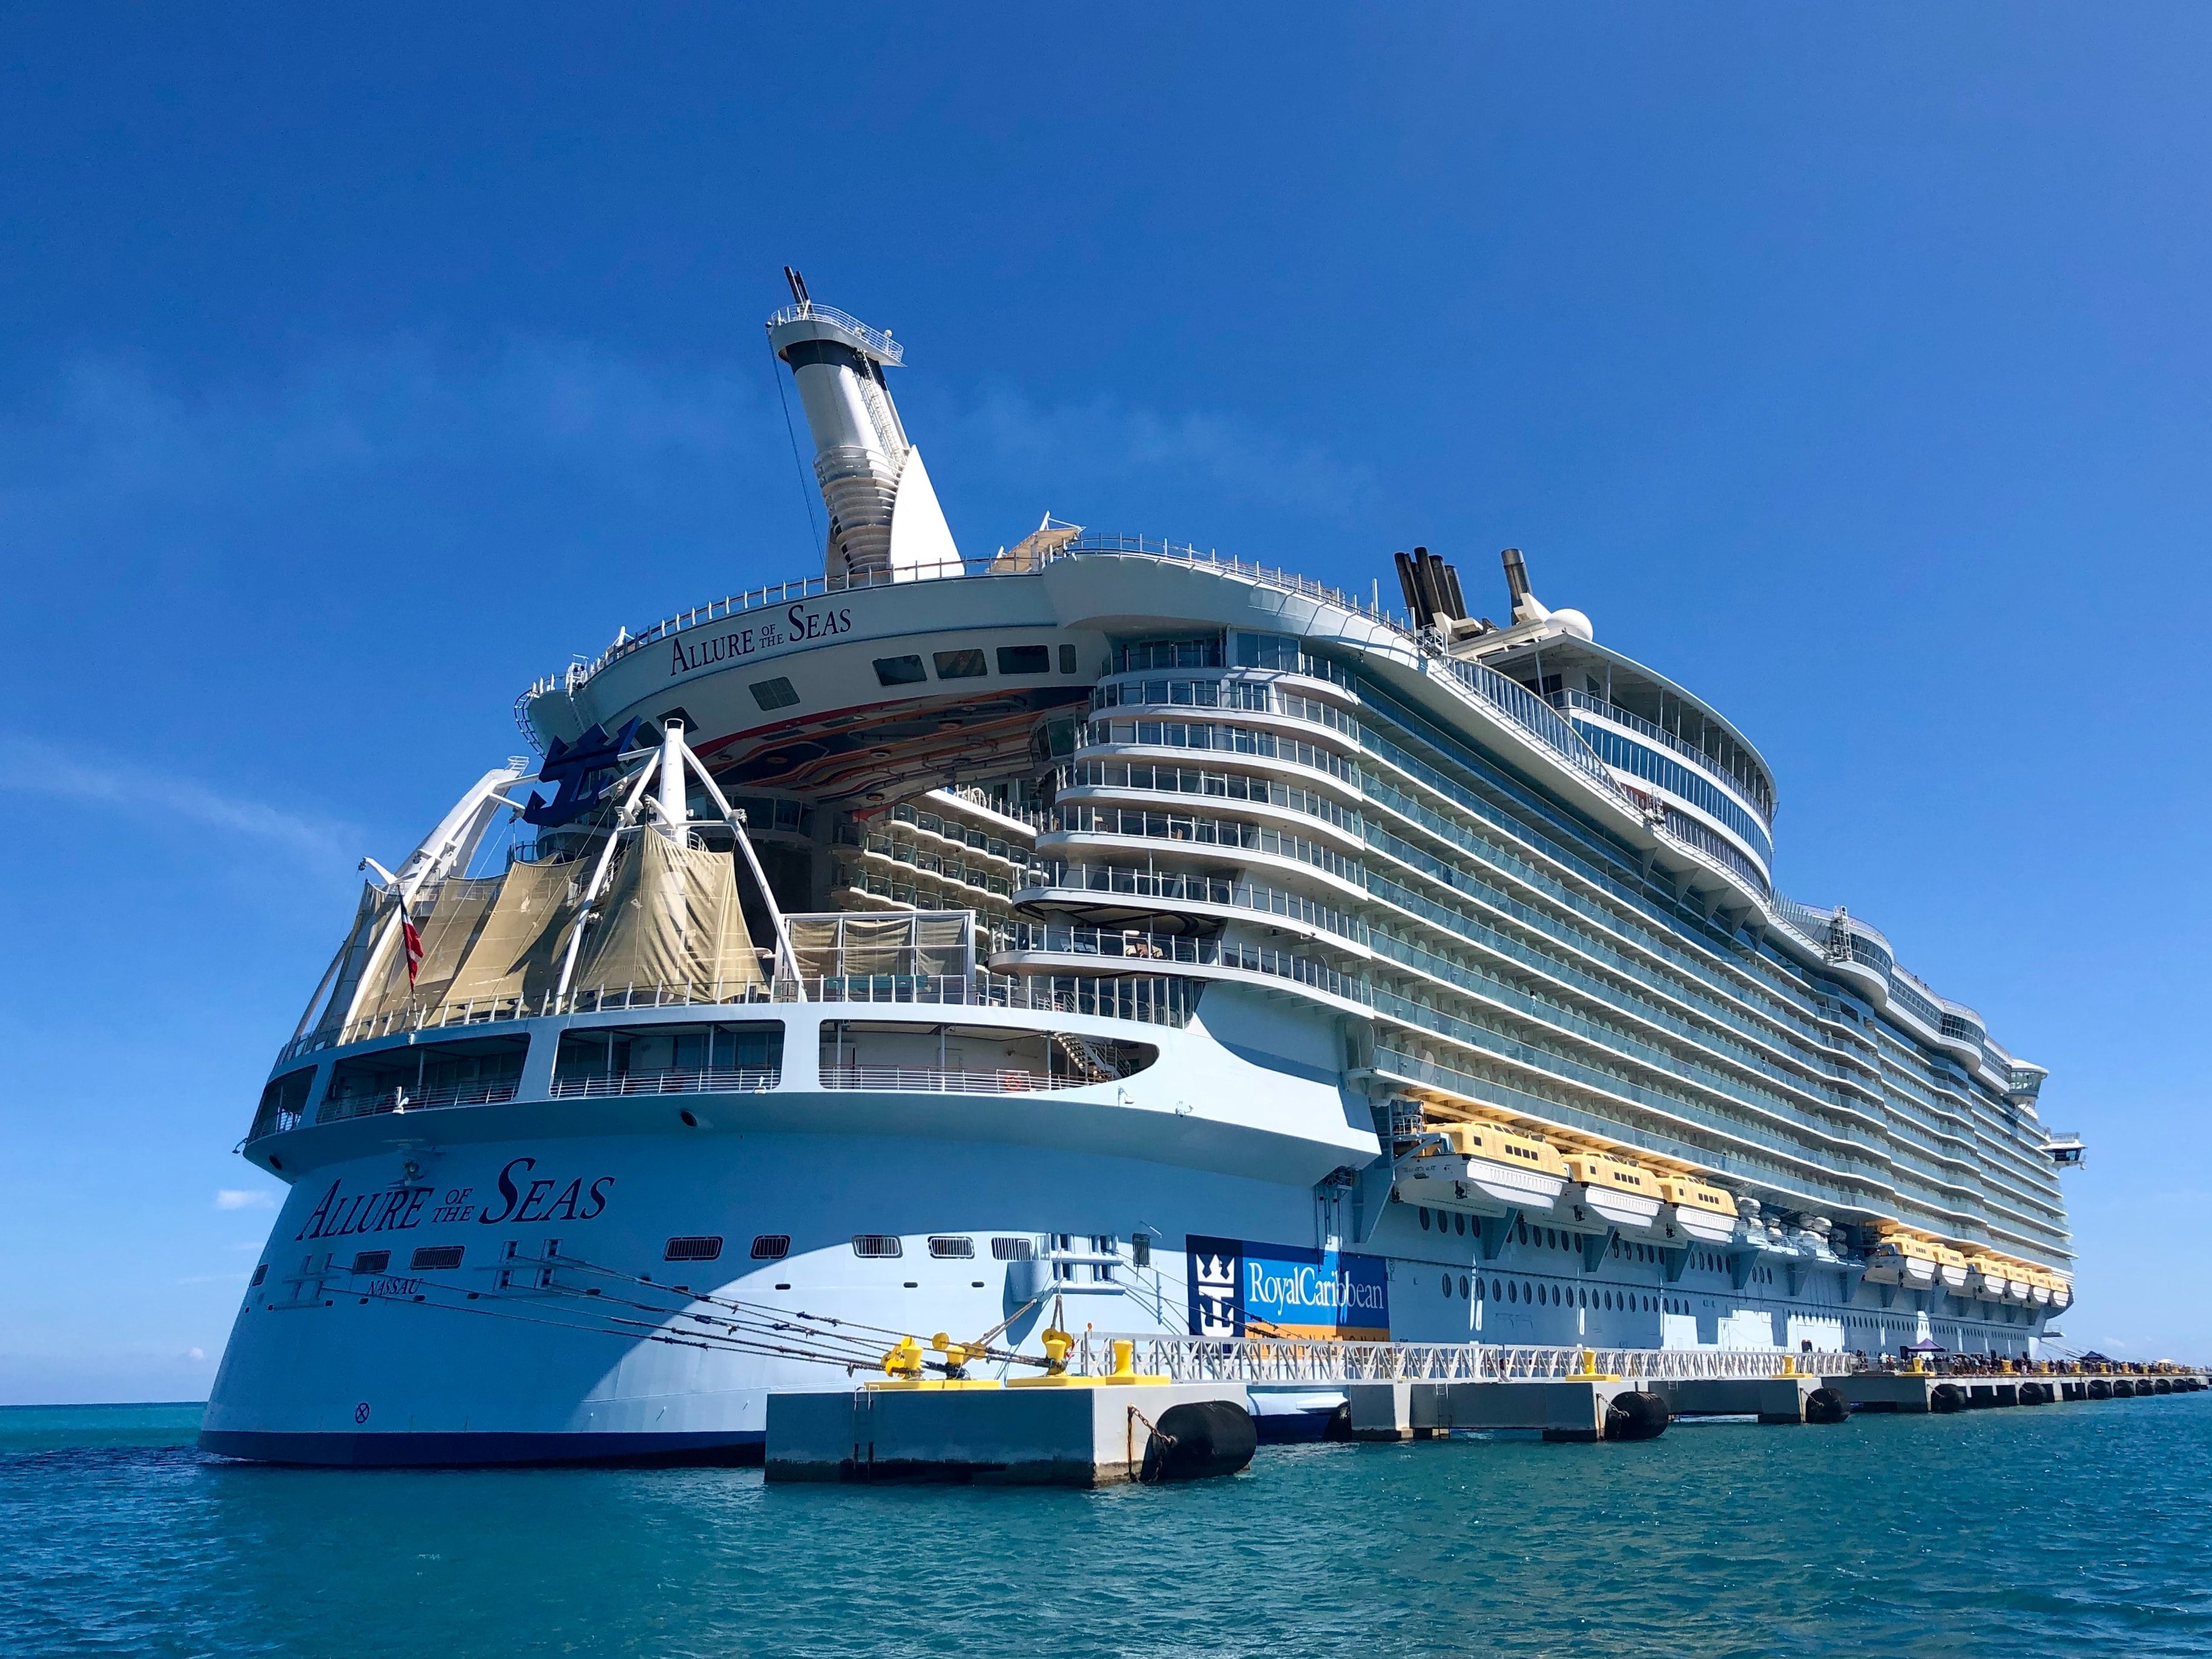 The Allure of the Seas of the Royal Caribbean International